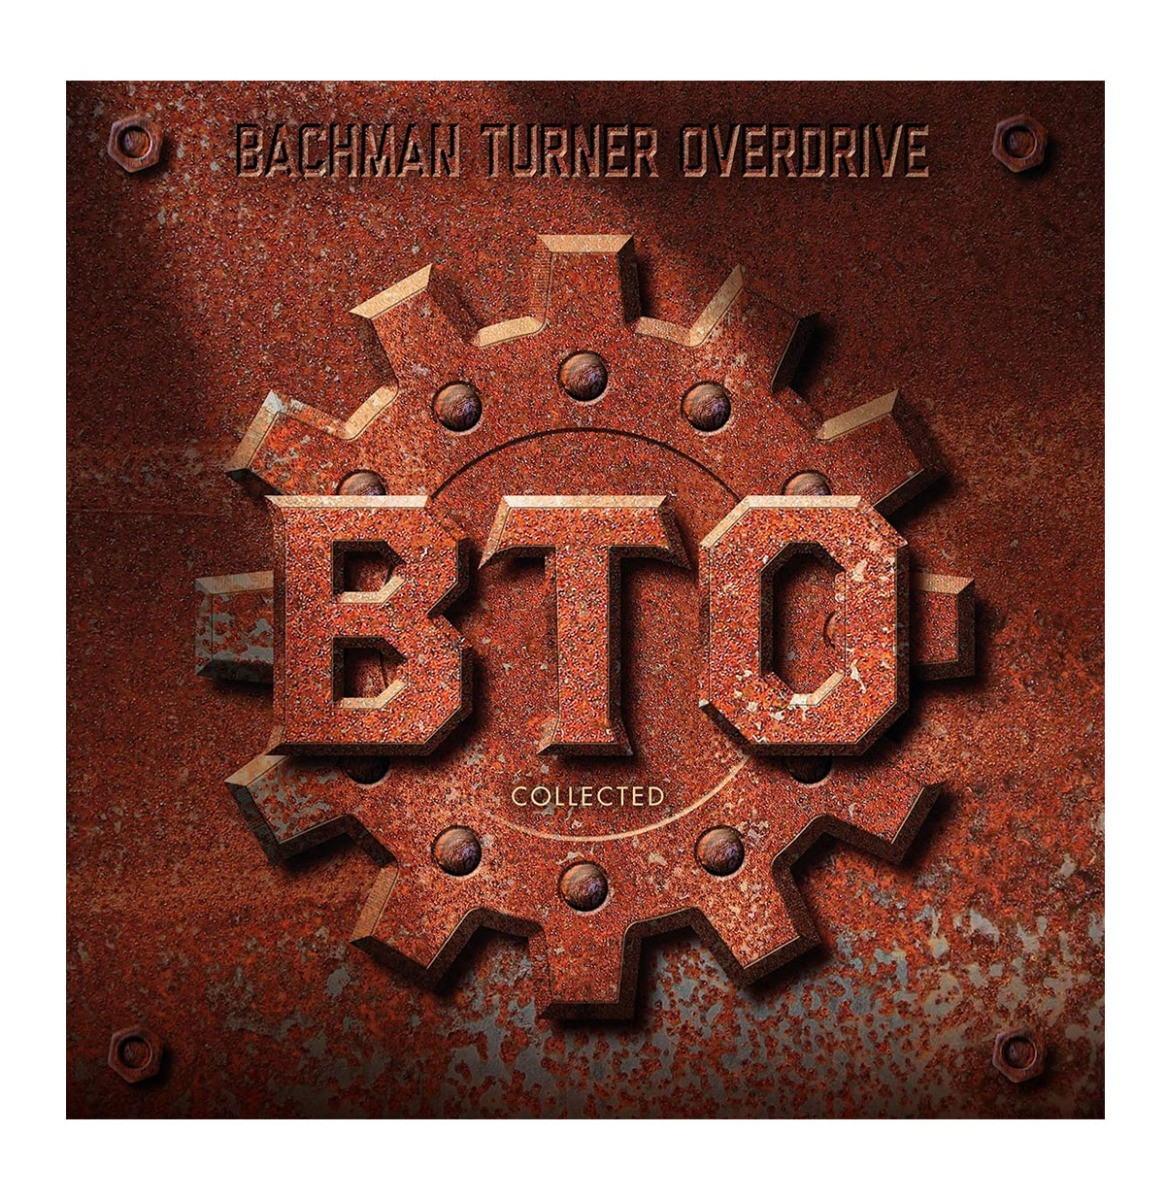 Bachman Turner Overdrive - Collected 2 LP